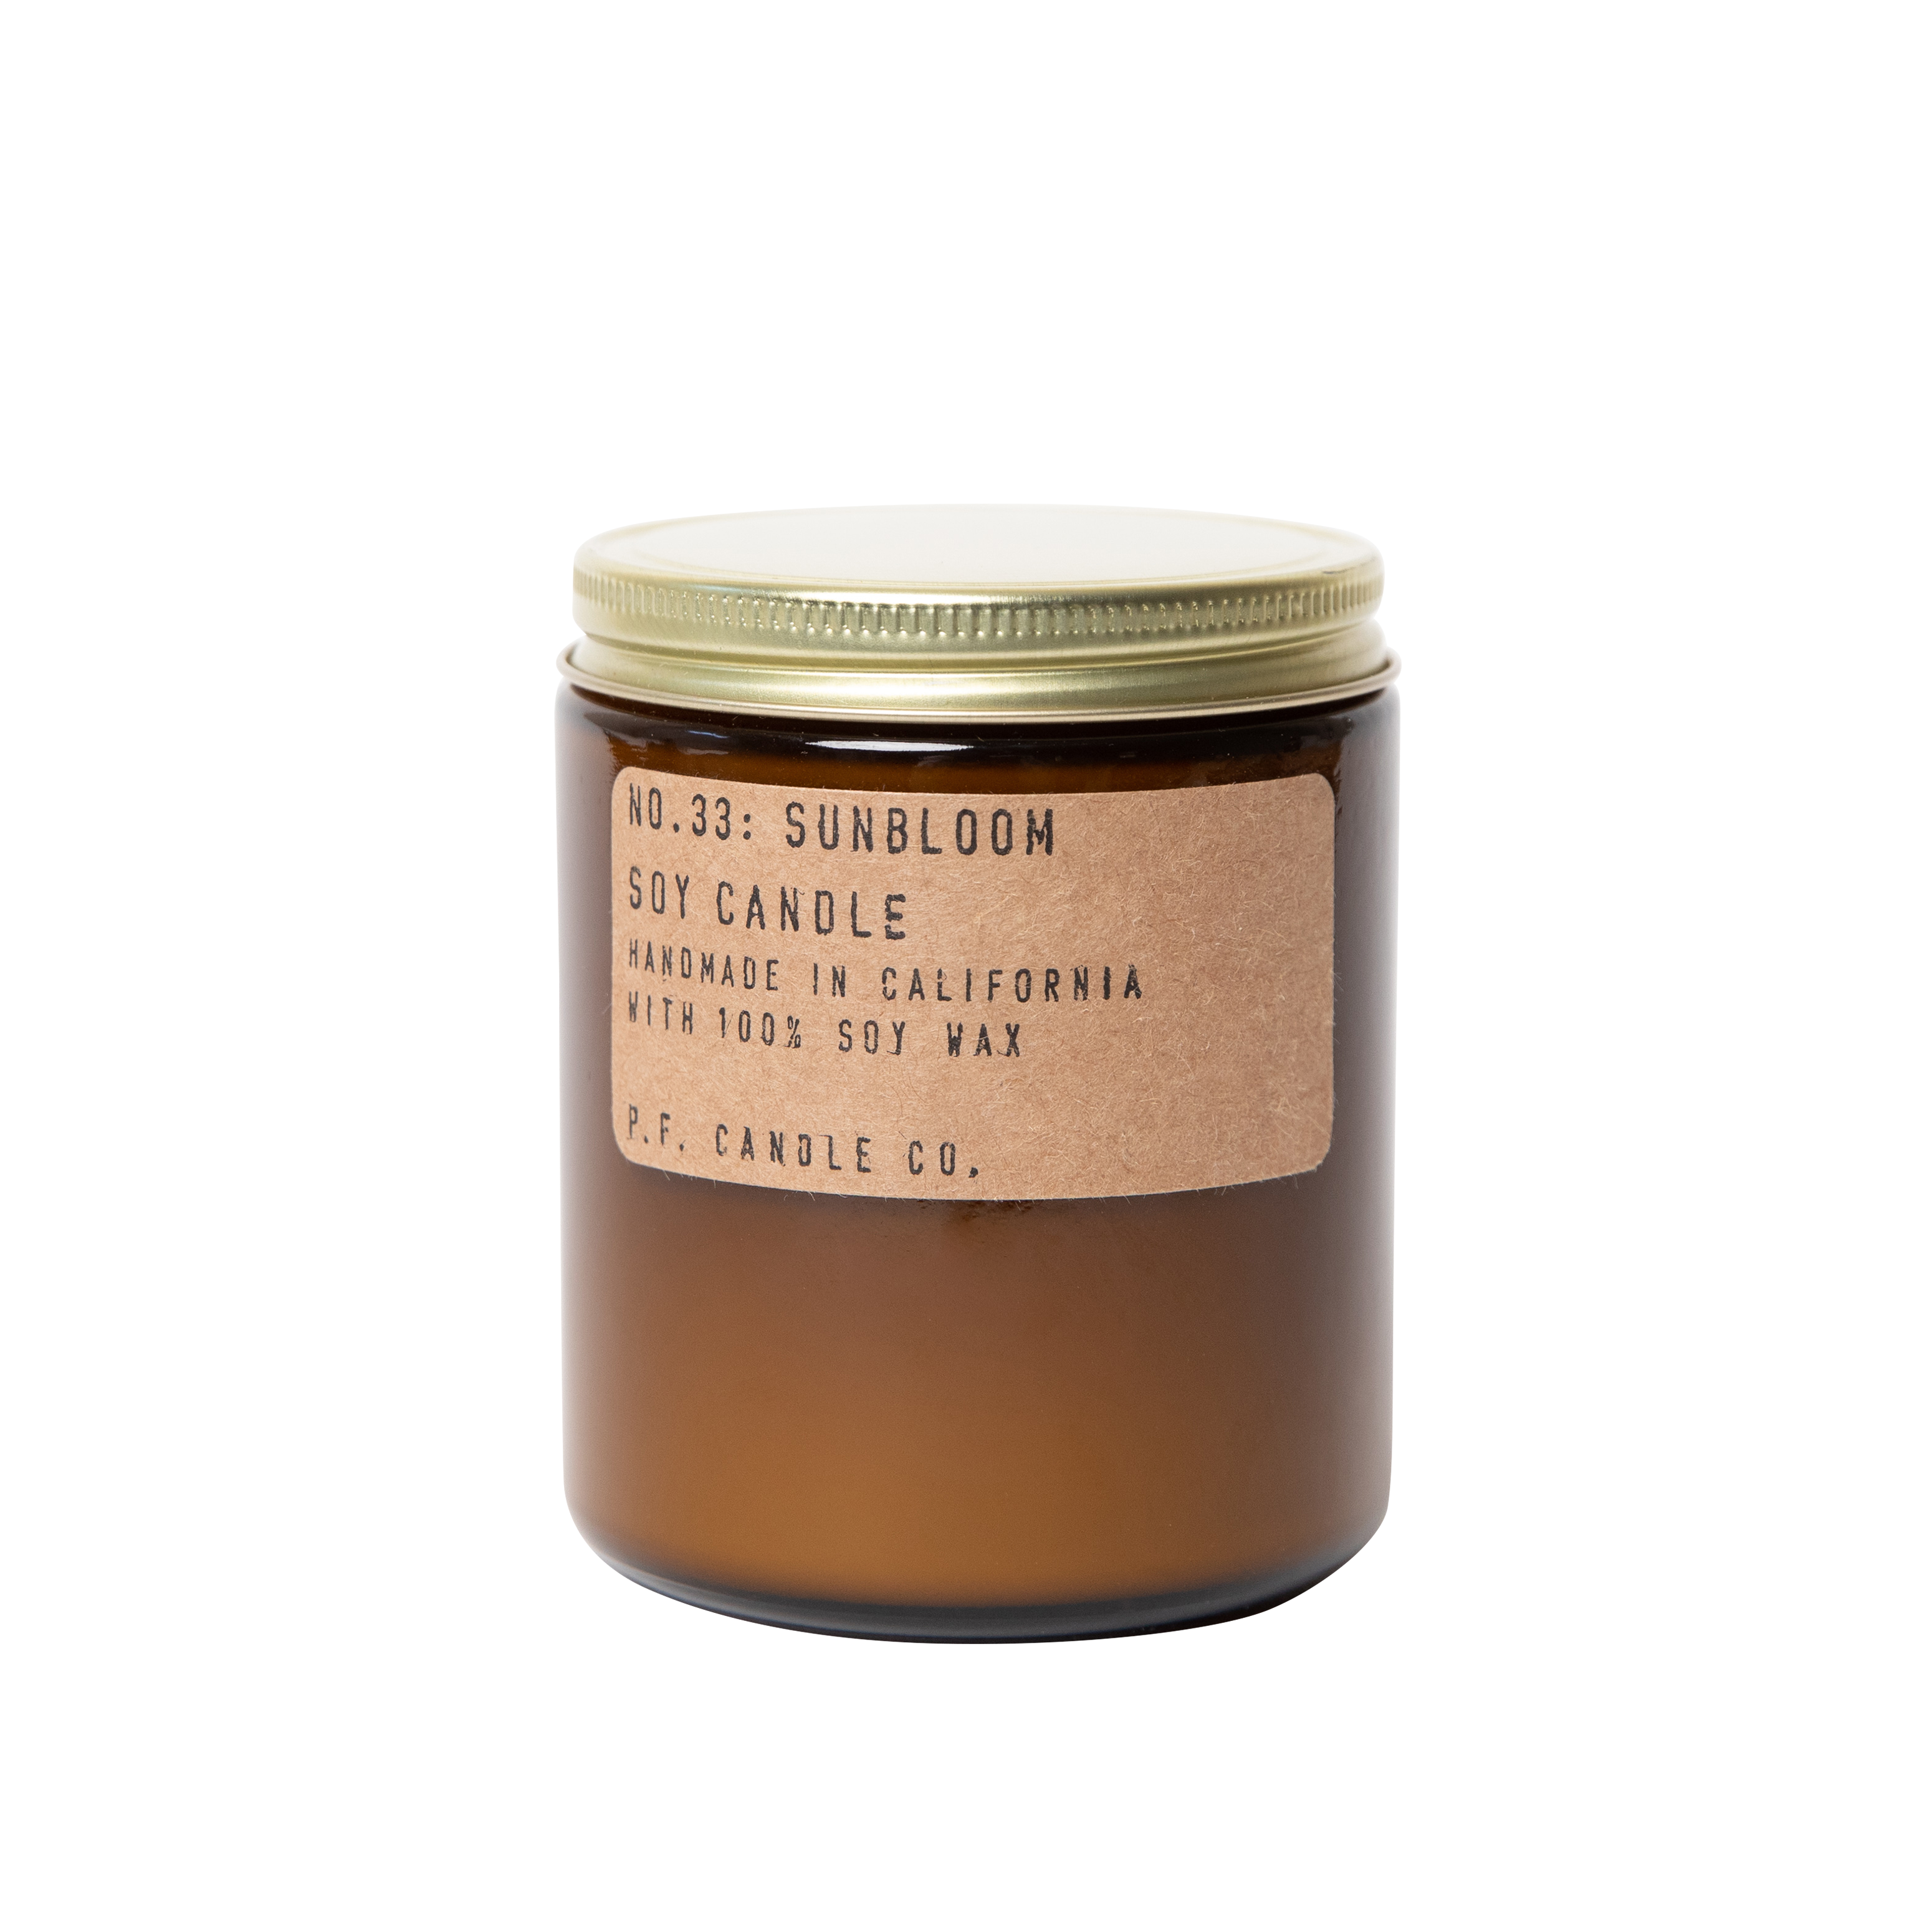 P.F. Candle Co. - P.F. Candle Co. - 7.2oz Soy Candle - Sunbloom